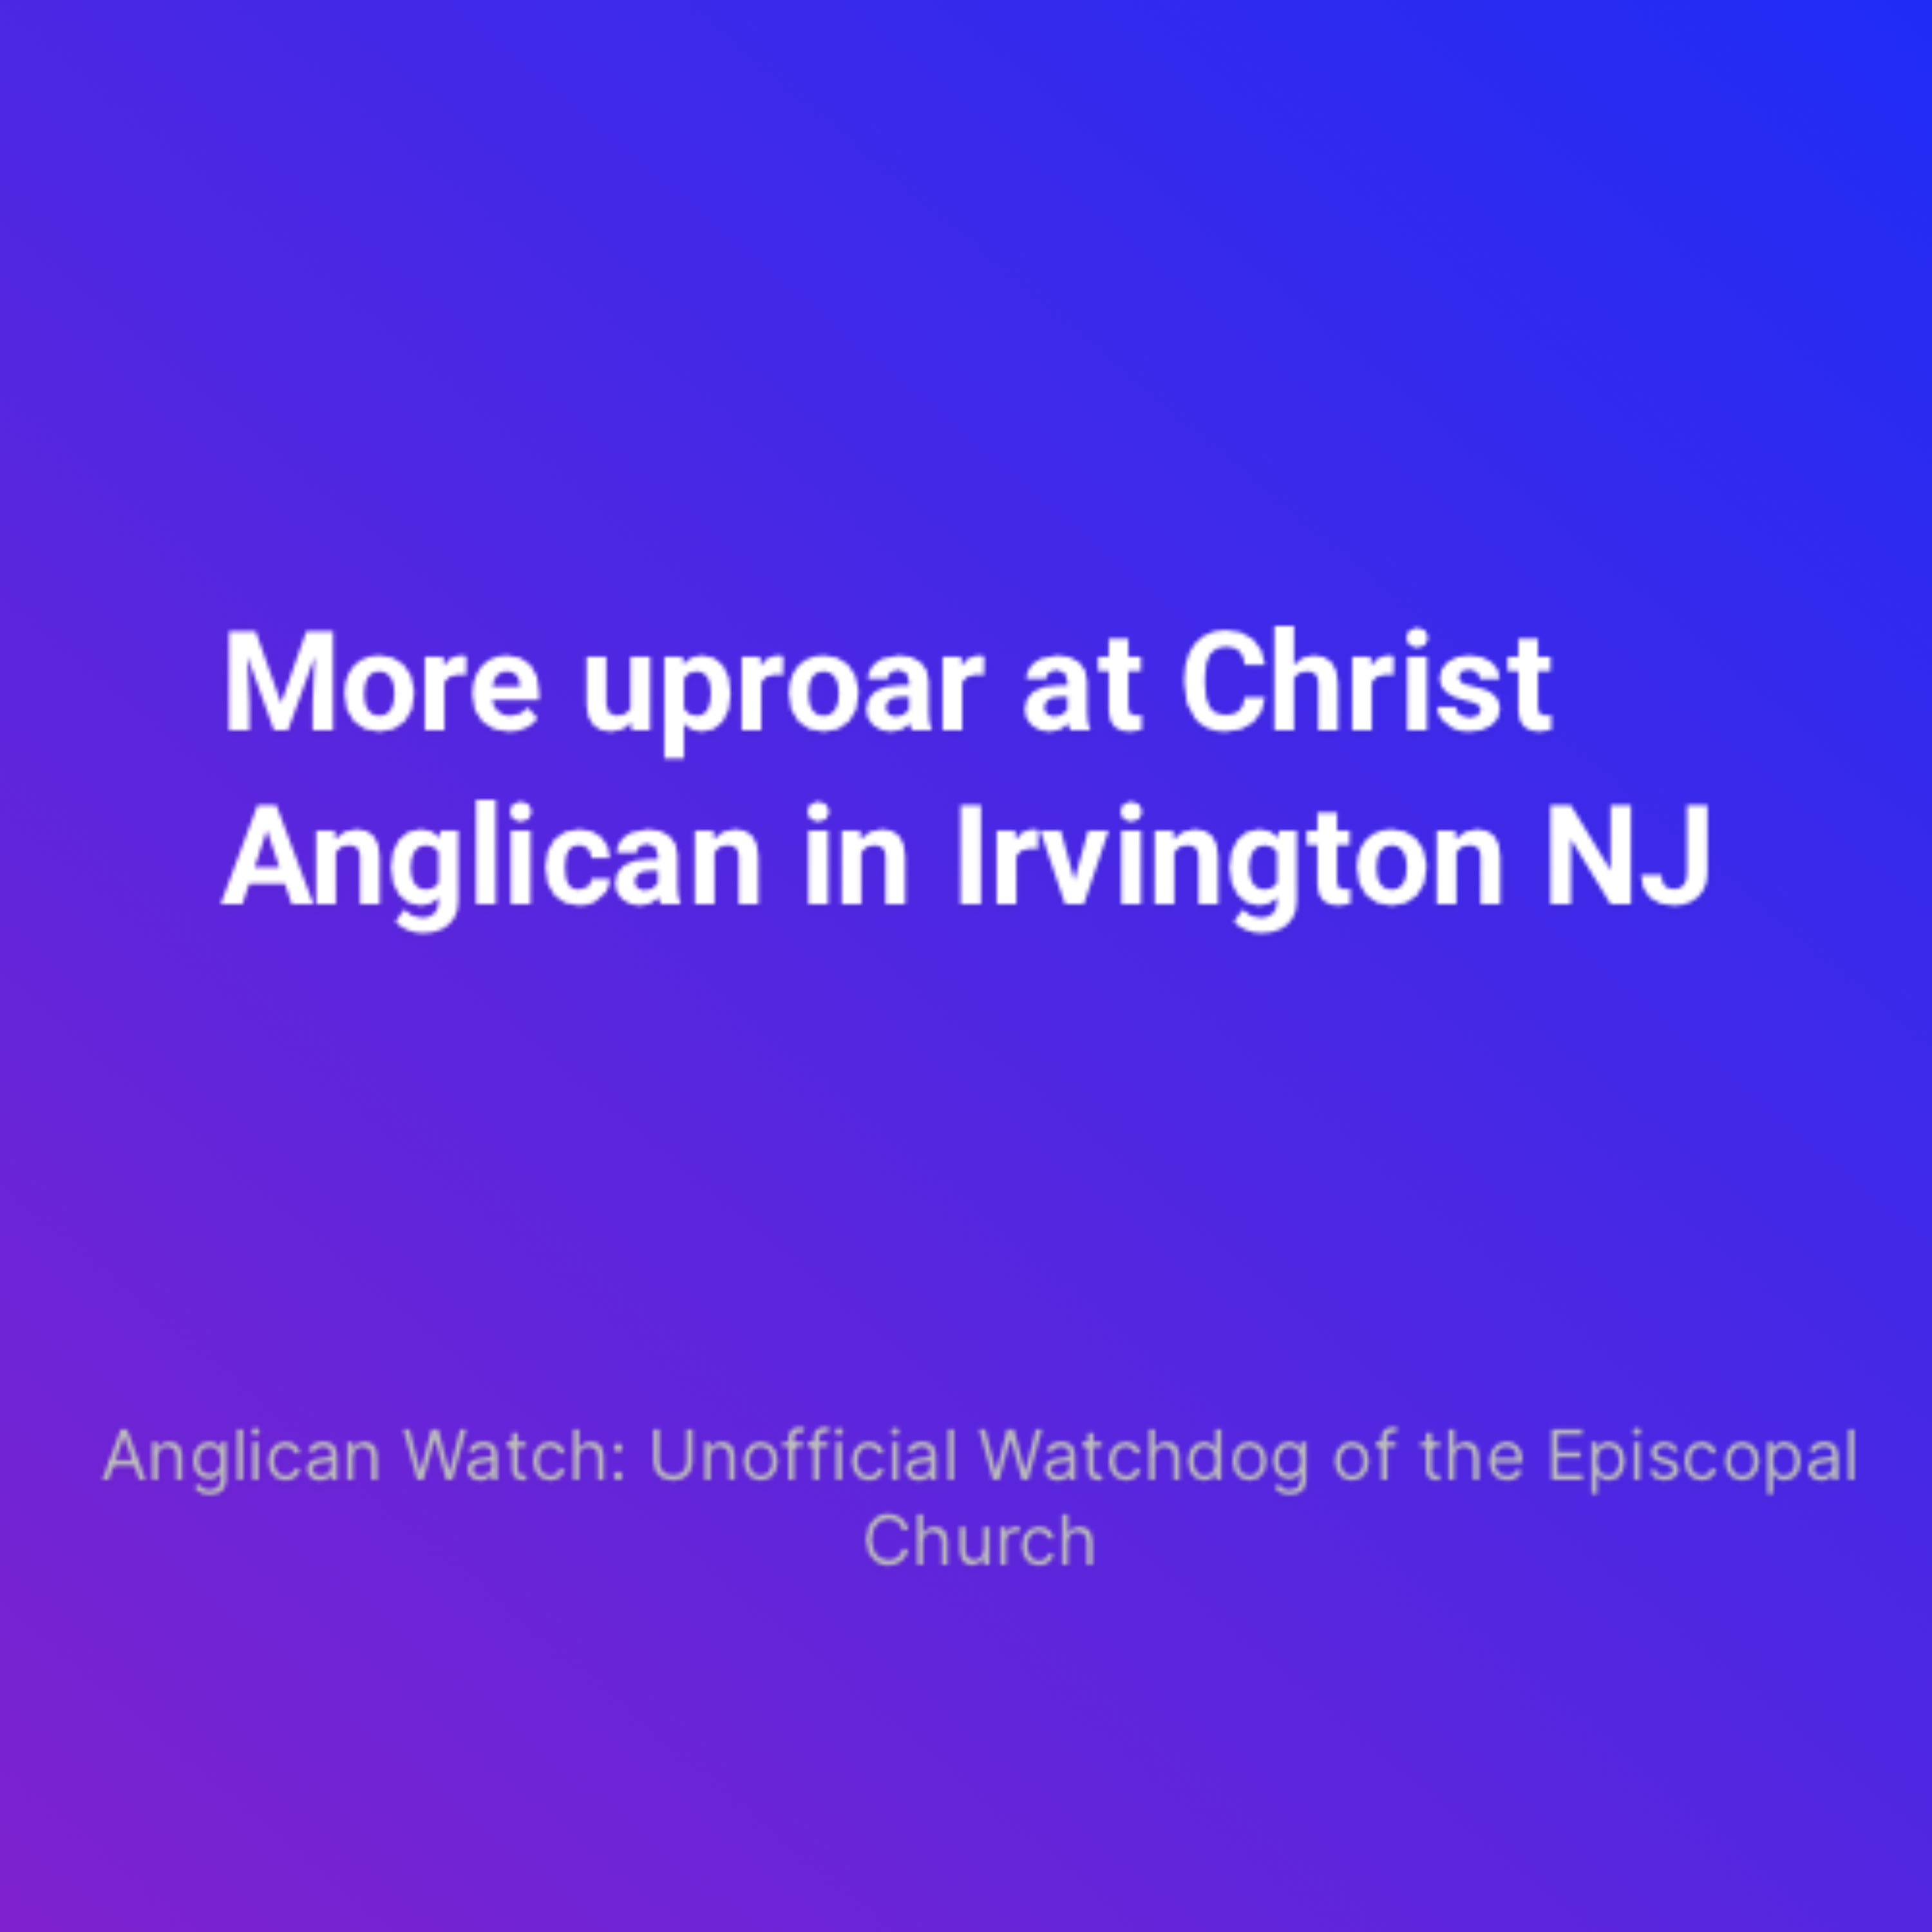 More uproar at Christ Anglican in Irvington NJ